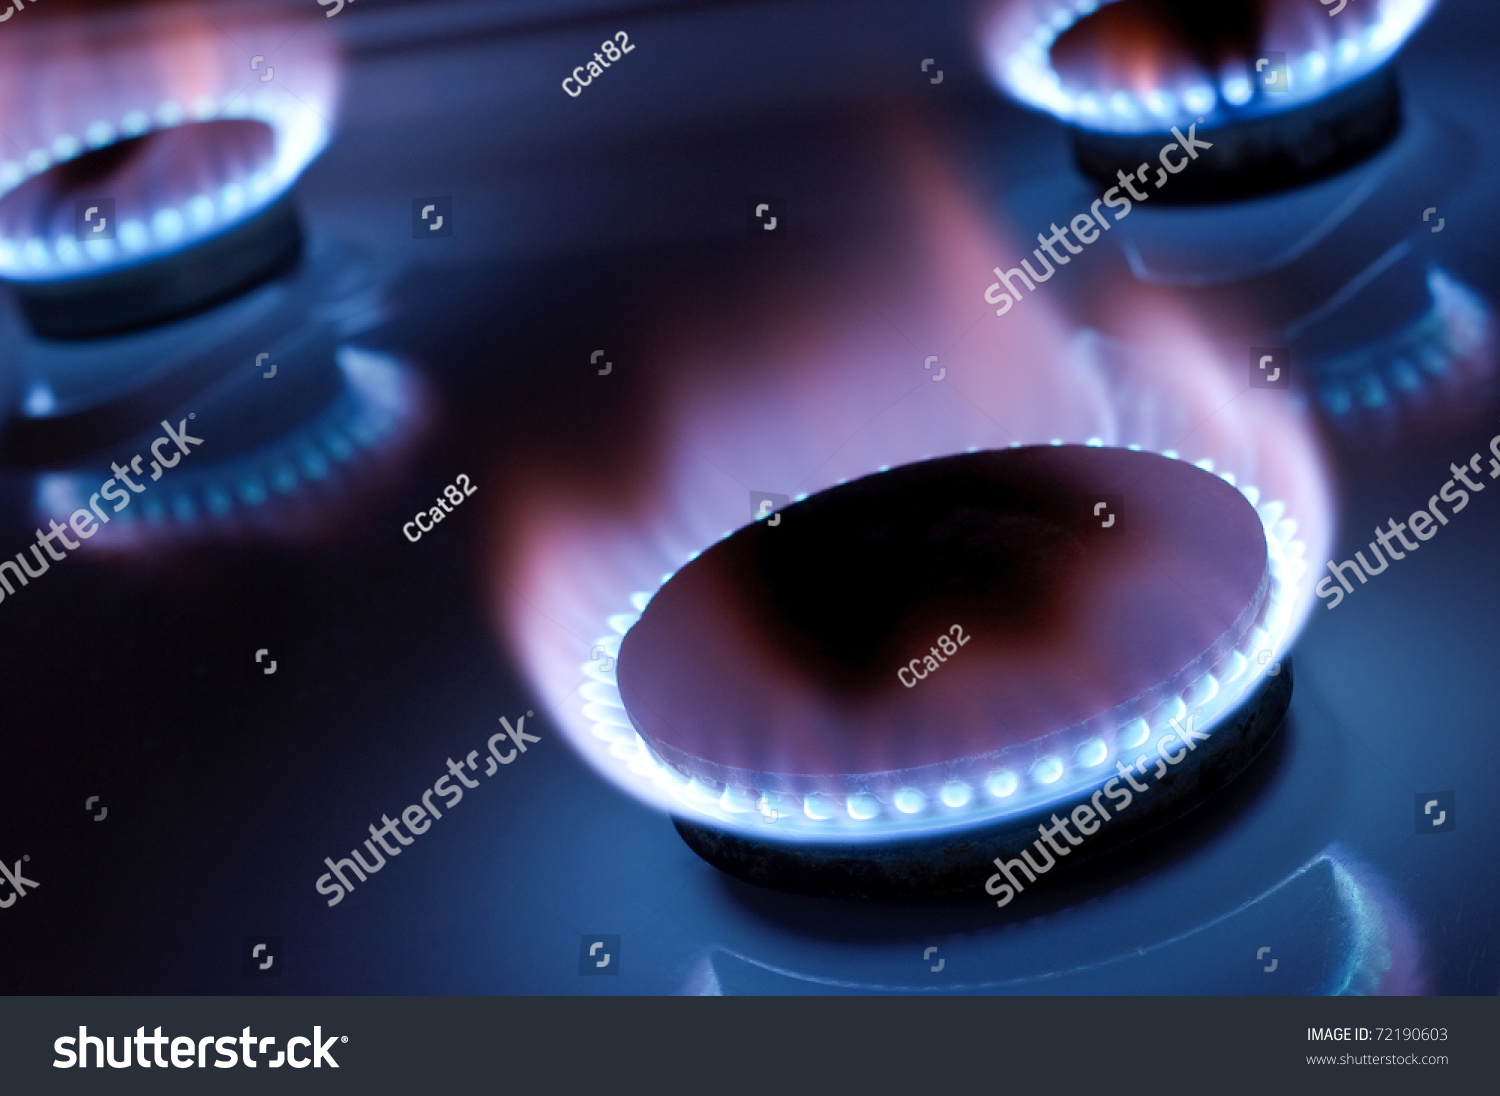 Gas burner in the kitchen oven #72190603